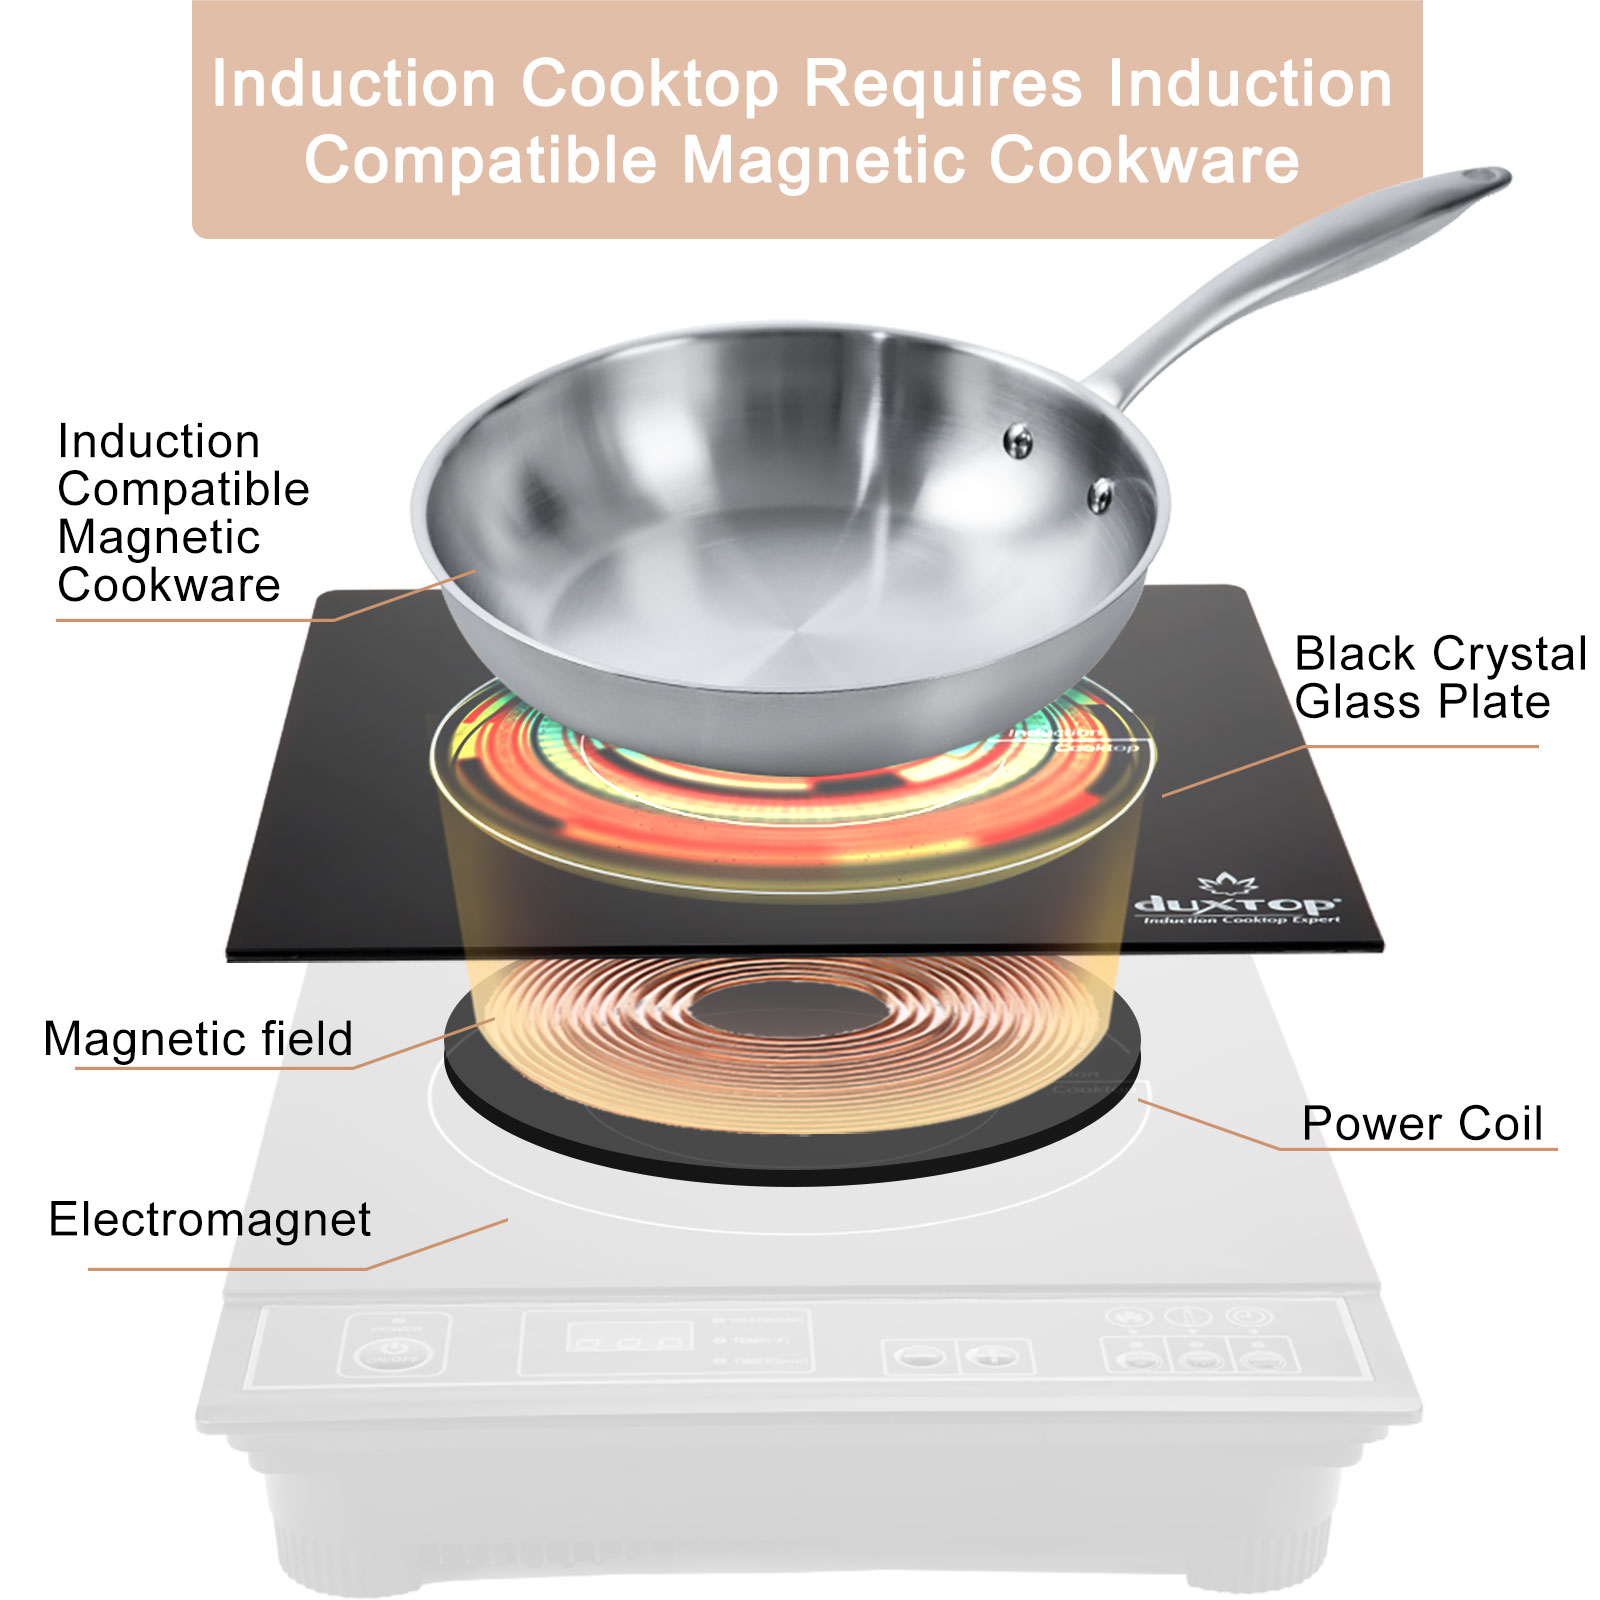 In-Depth Product Review: Secura Duxtop 9100MC Portable Induction Cooker  (aka Countertop Burner)